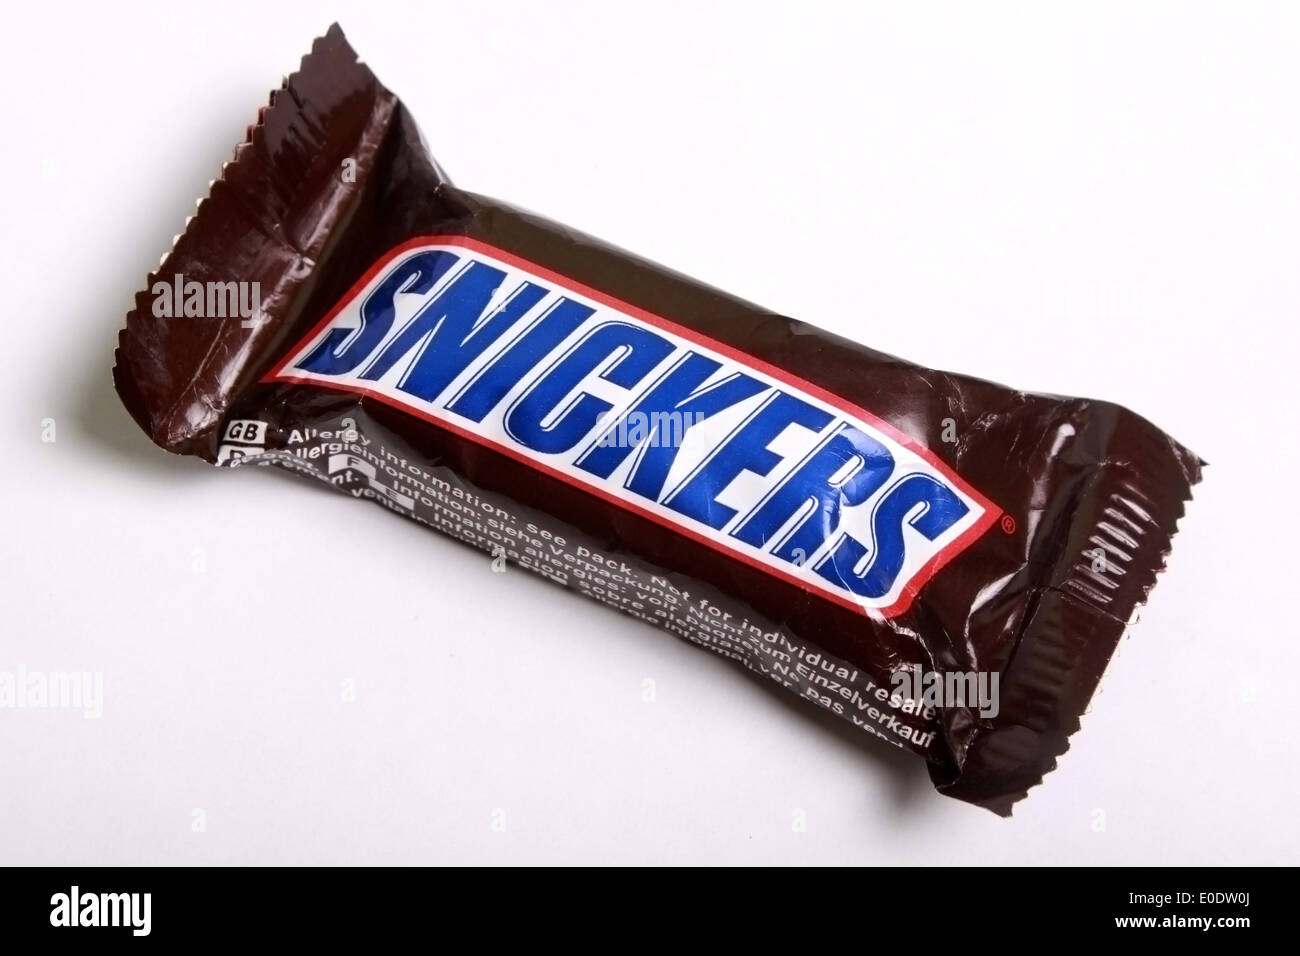 snickers chocolate bar in wrapper Stock Photo